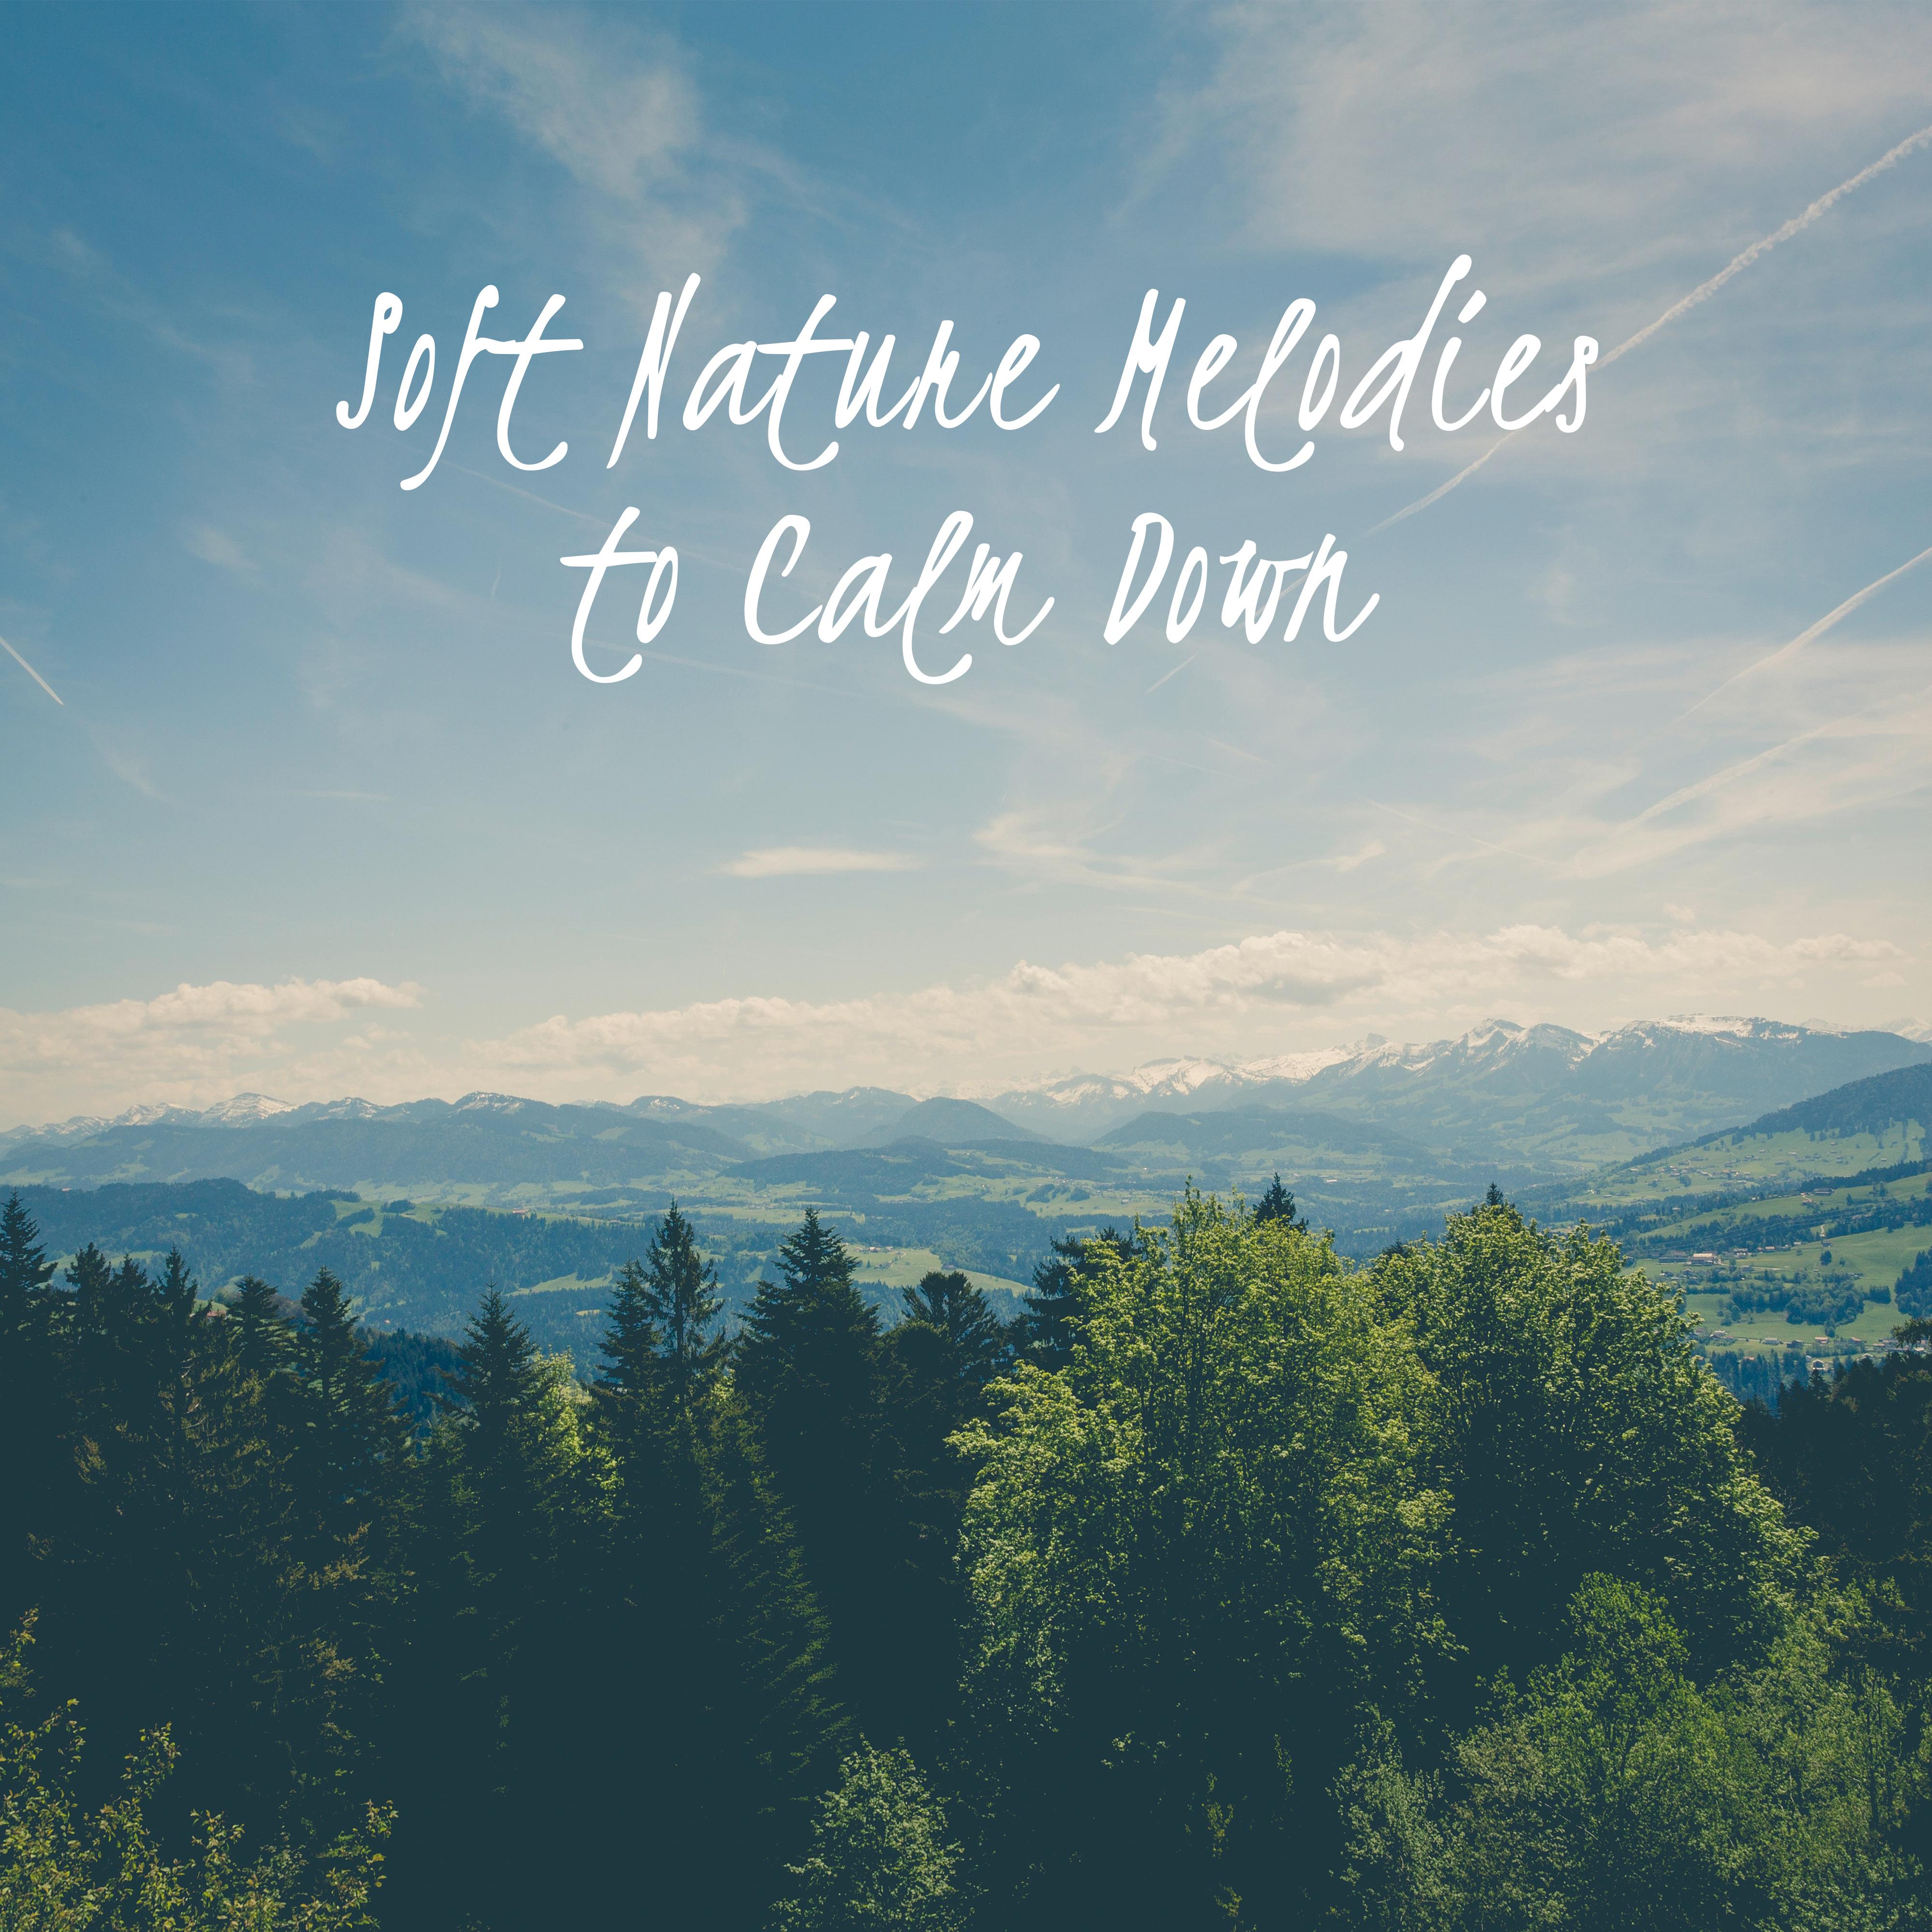 Soft Nature Melodies to Calm Down